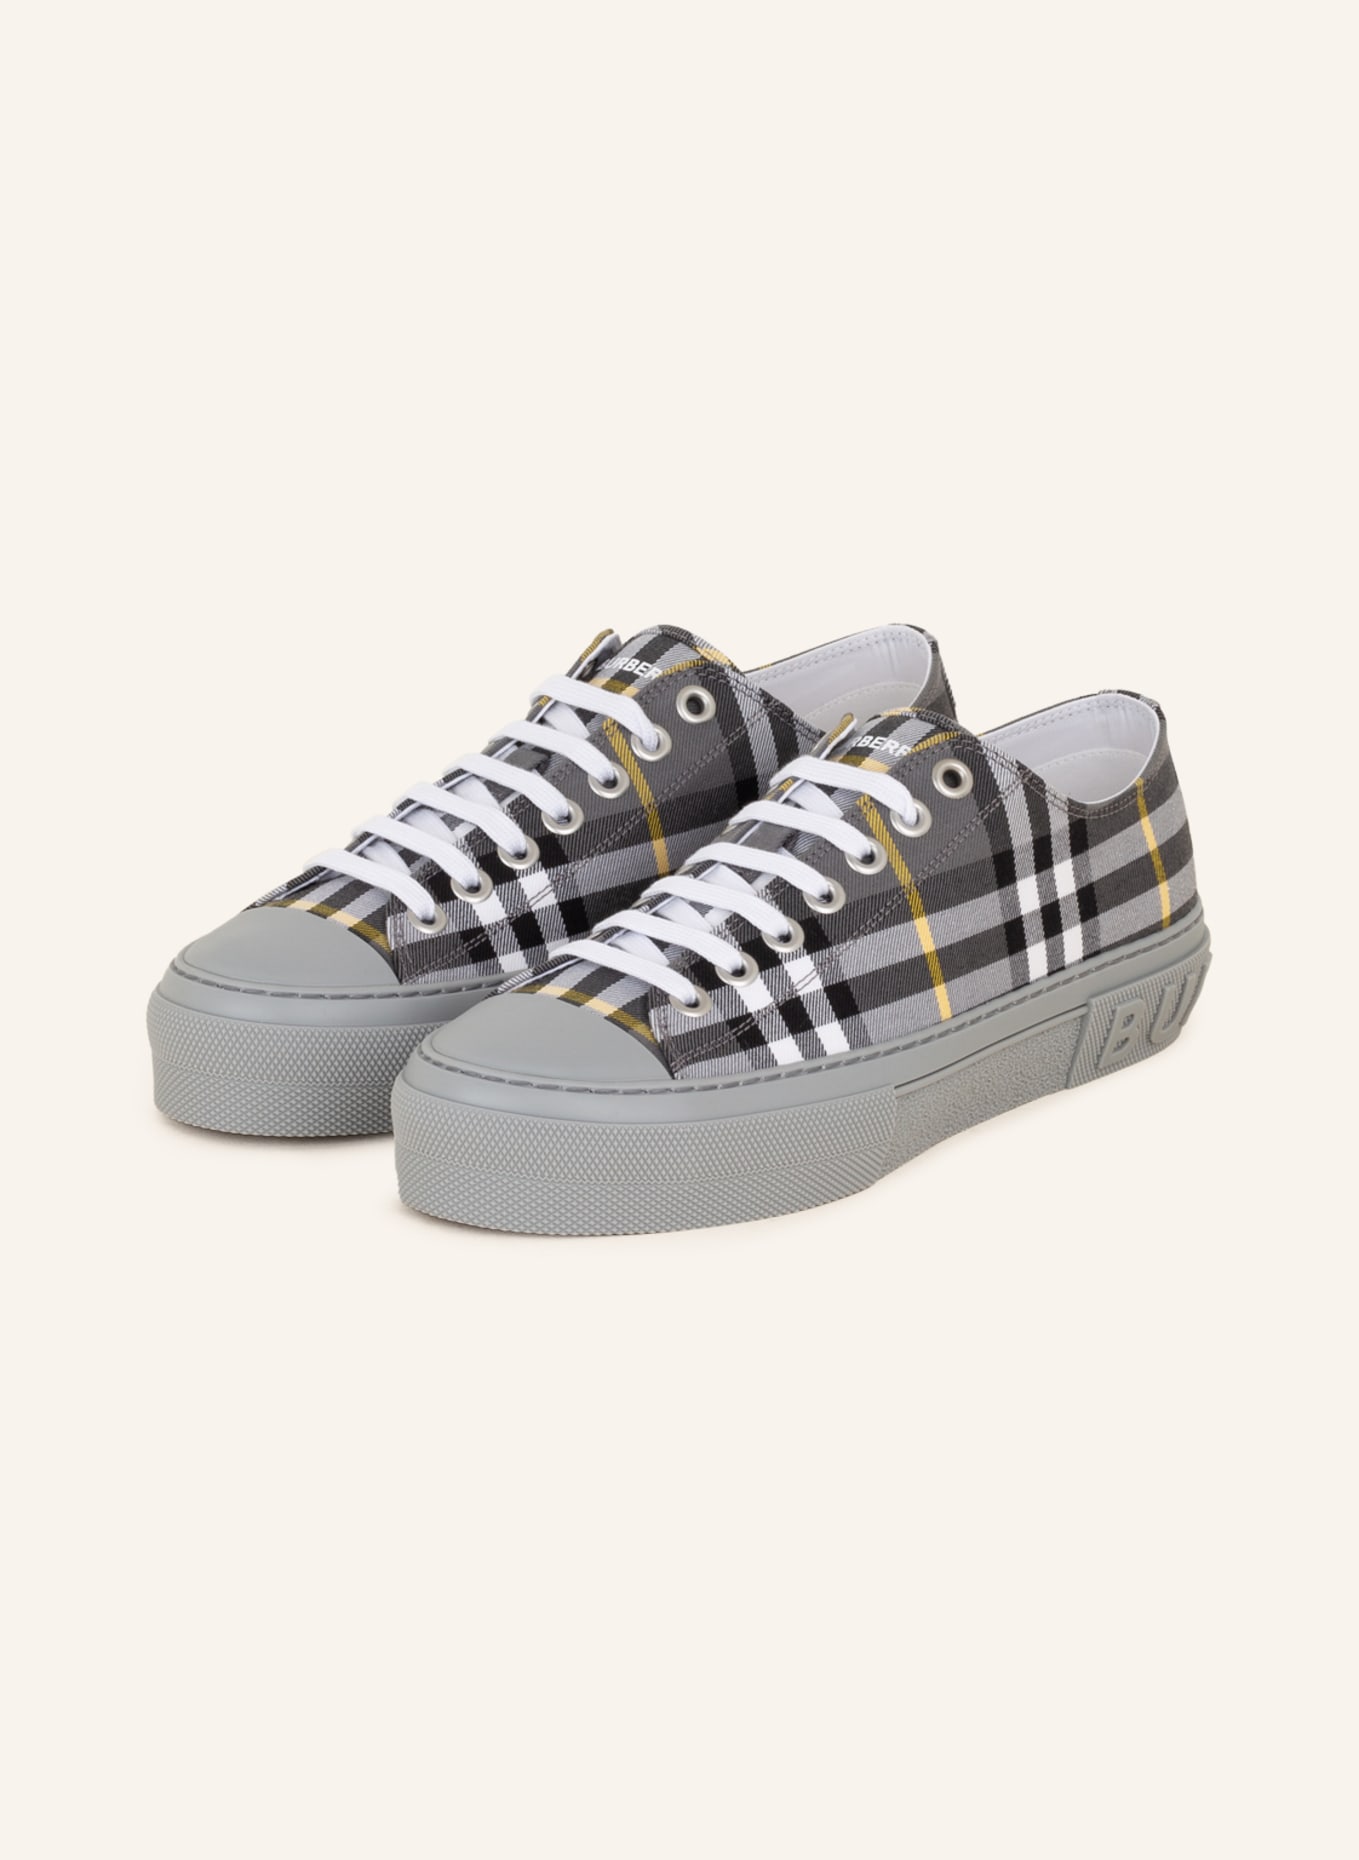 BURBERRY Sneakers JACK, Color: GRAY/ BLACK/ YELLOW (Image 1)